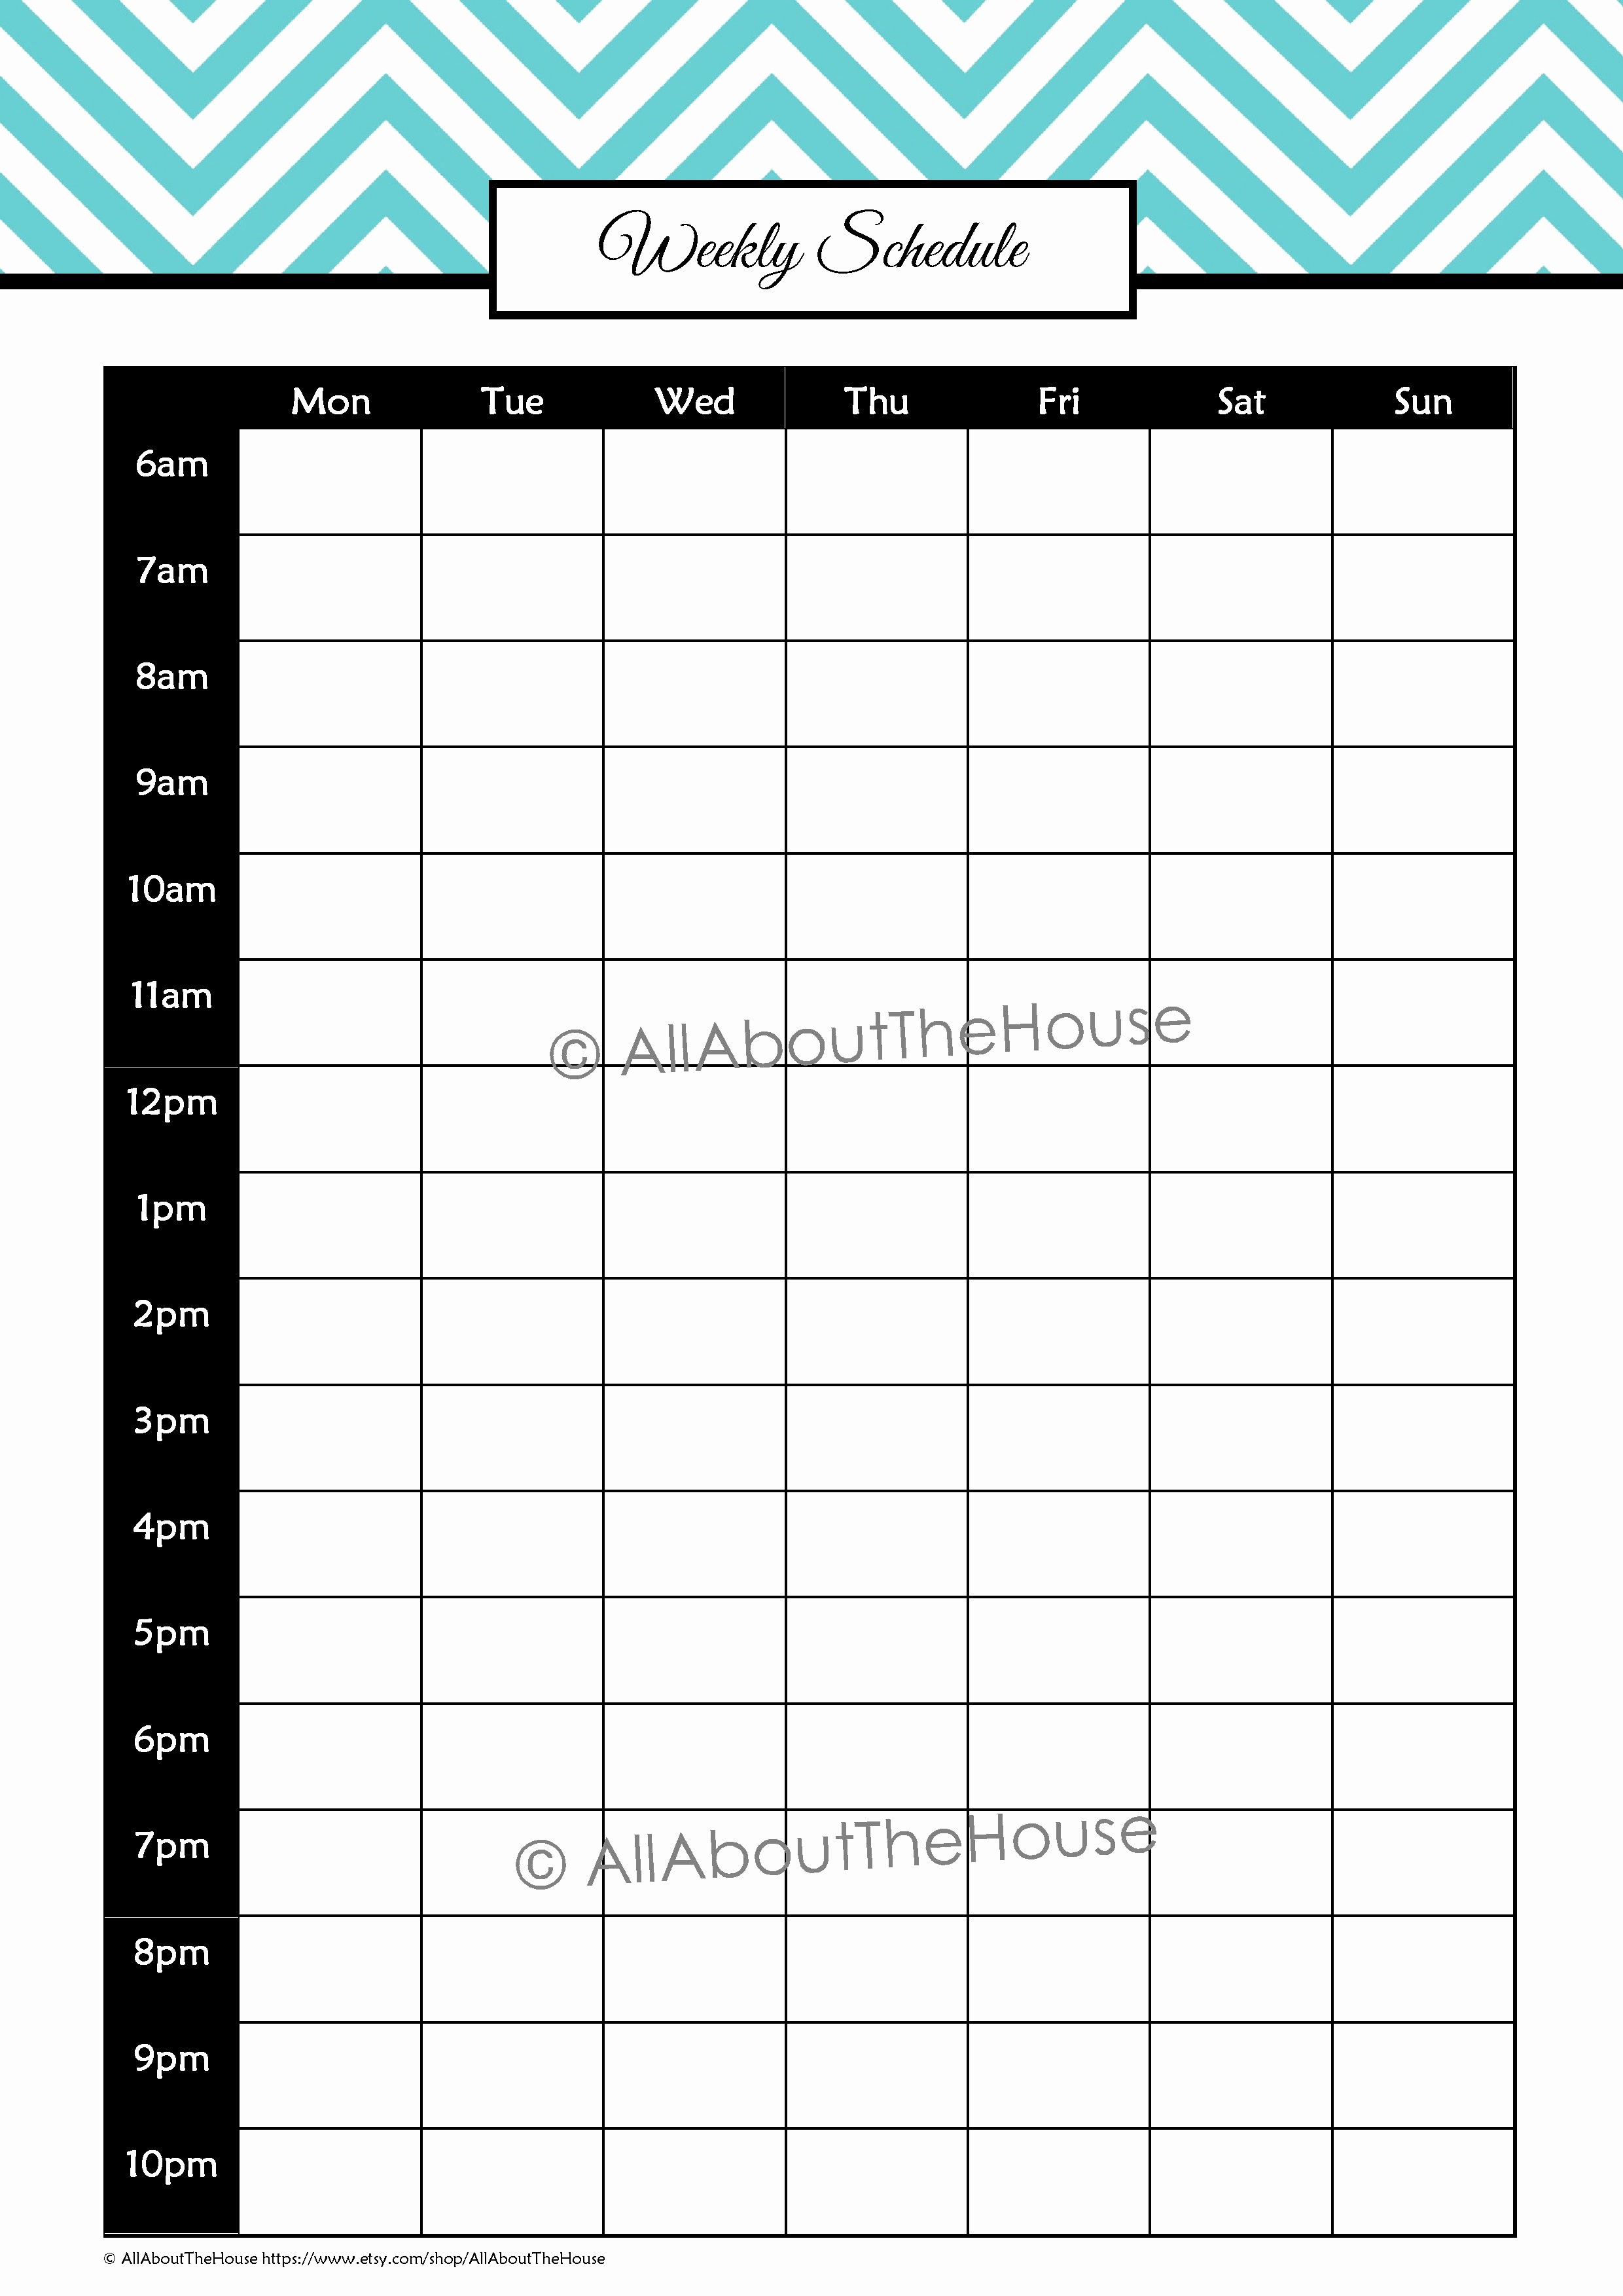 Weekly Schedule by Hour Template Inspirational 8 Best Of 24 Hourly Schedule Printable 24 Hour